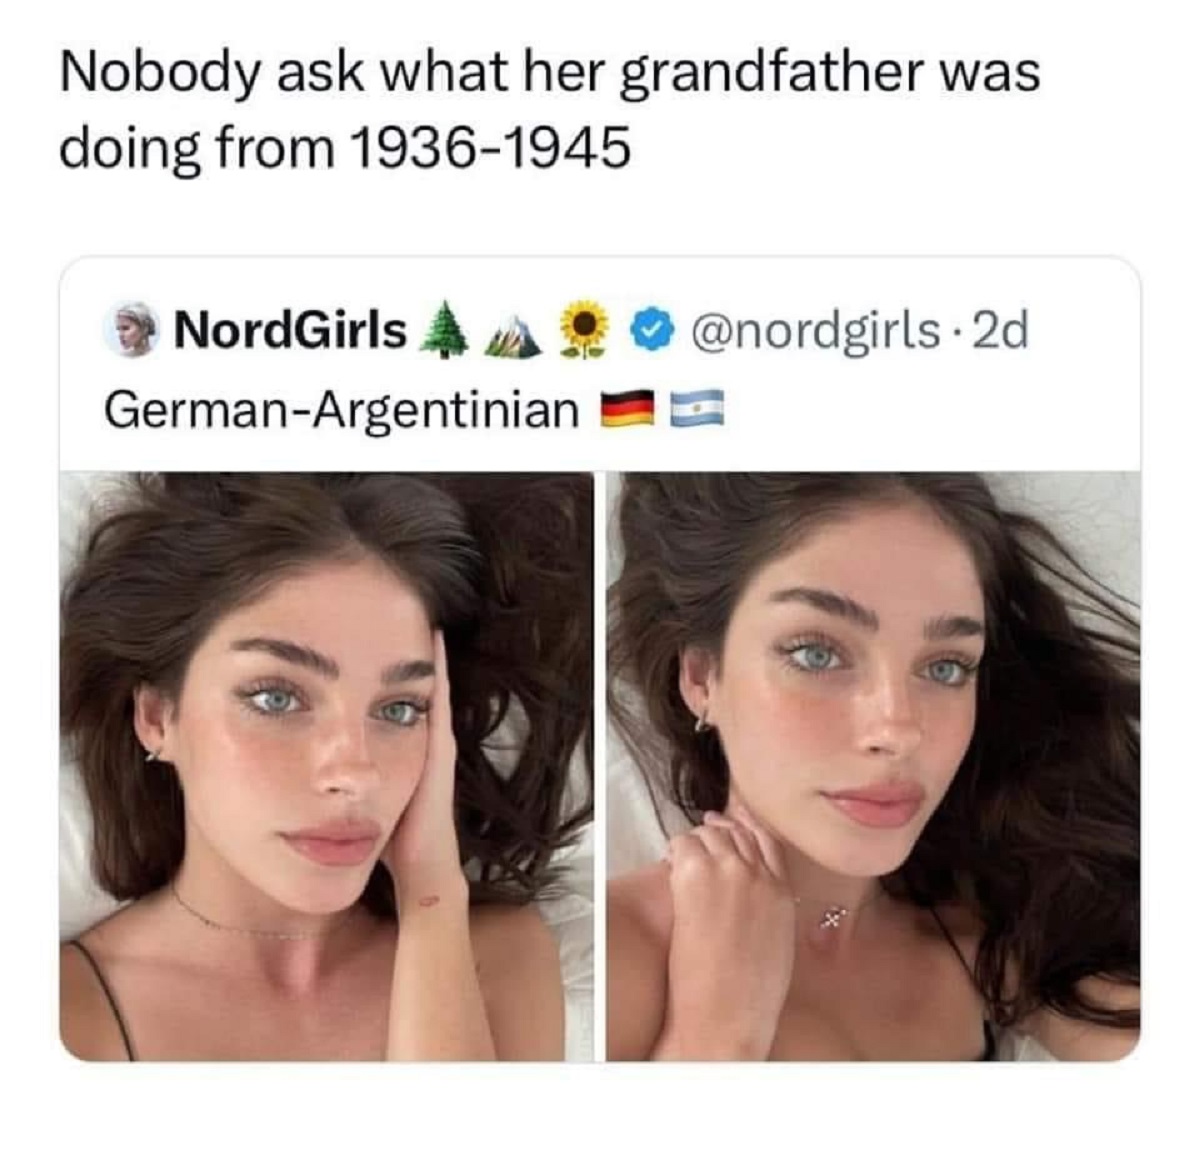 hair coloring - Nobody ask what her grandfather was doing from 19361945 NordGirls GermanArgentinian .2d